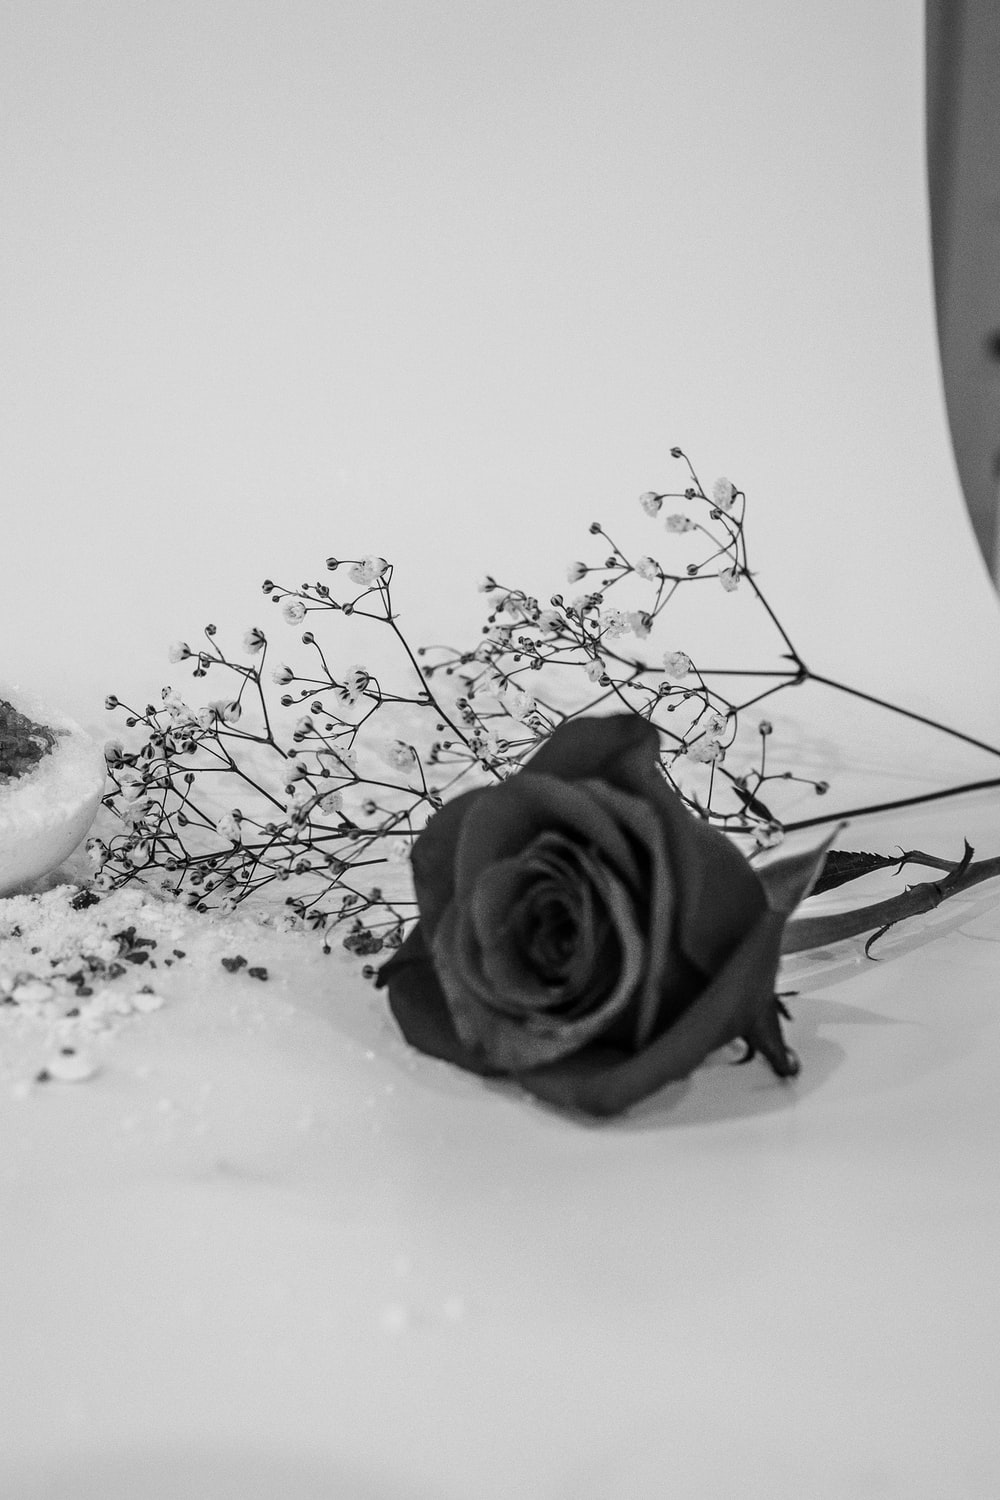 Black And White Rose Picture. Download Free Image